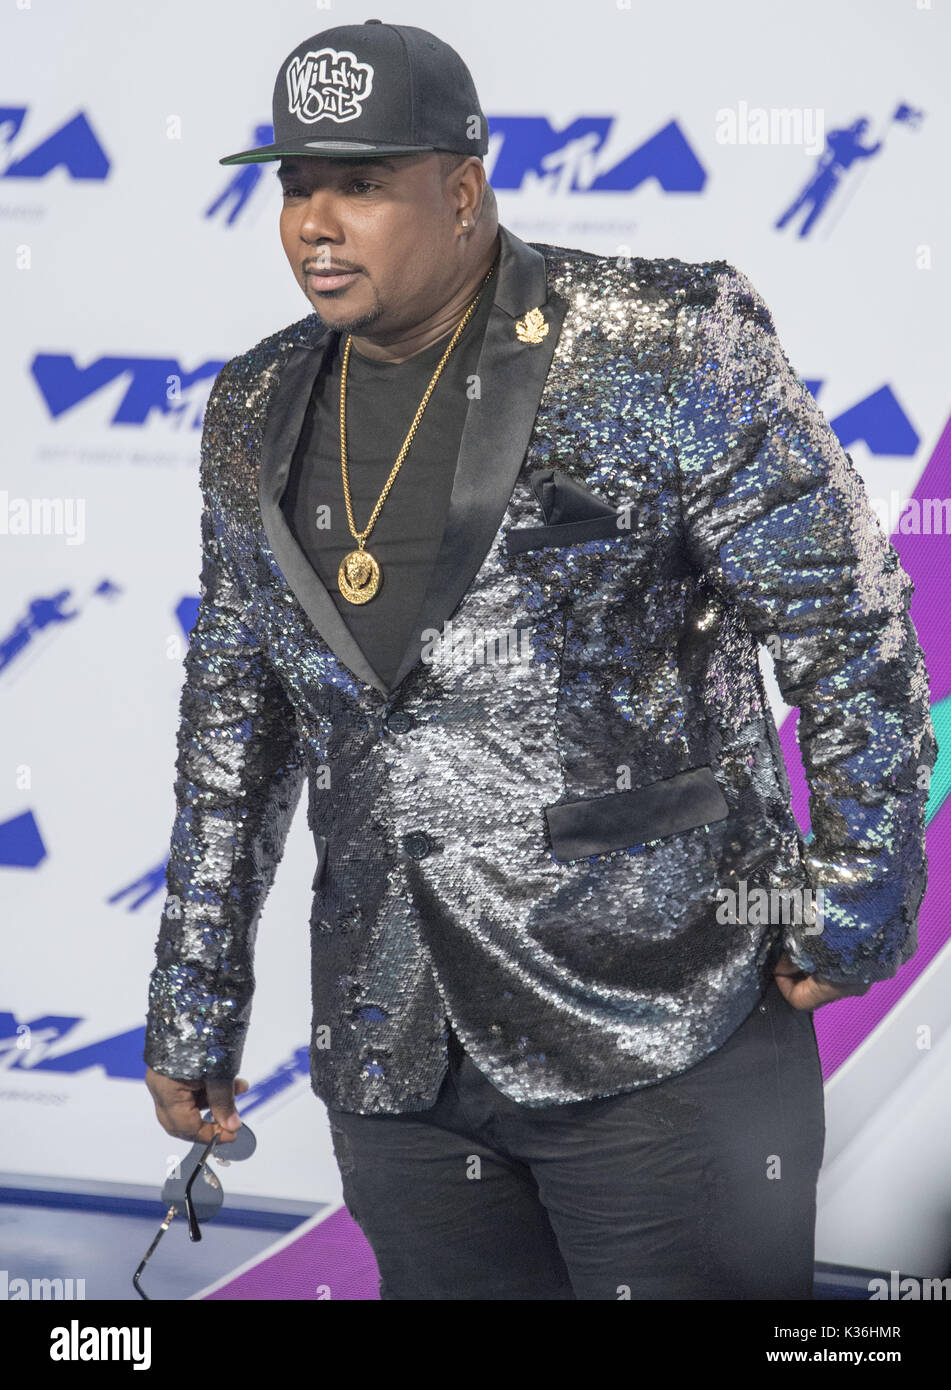 August 27, 2017 - Inglewood, California, U.S - Rip Michaels  arrives at the 2017 MTV Video Music Awards   Photo Room held at The Forum in Inglewood/Los Angeles on Sunday afternoon. (Credit Image: © David Bro via ZUMA Wire) Stock Photo